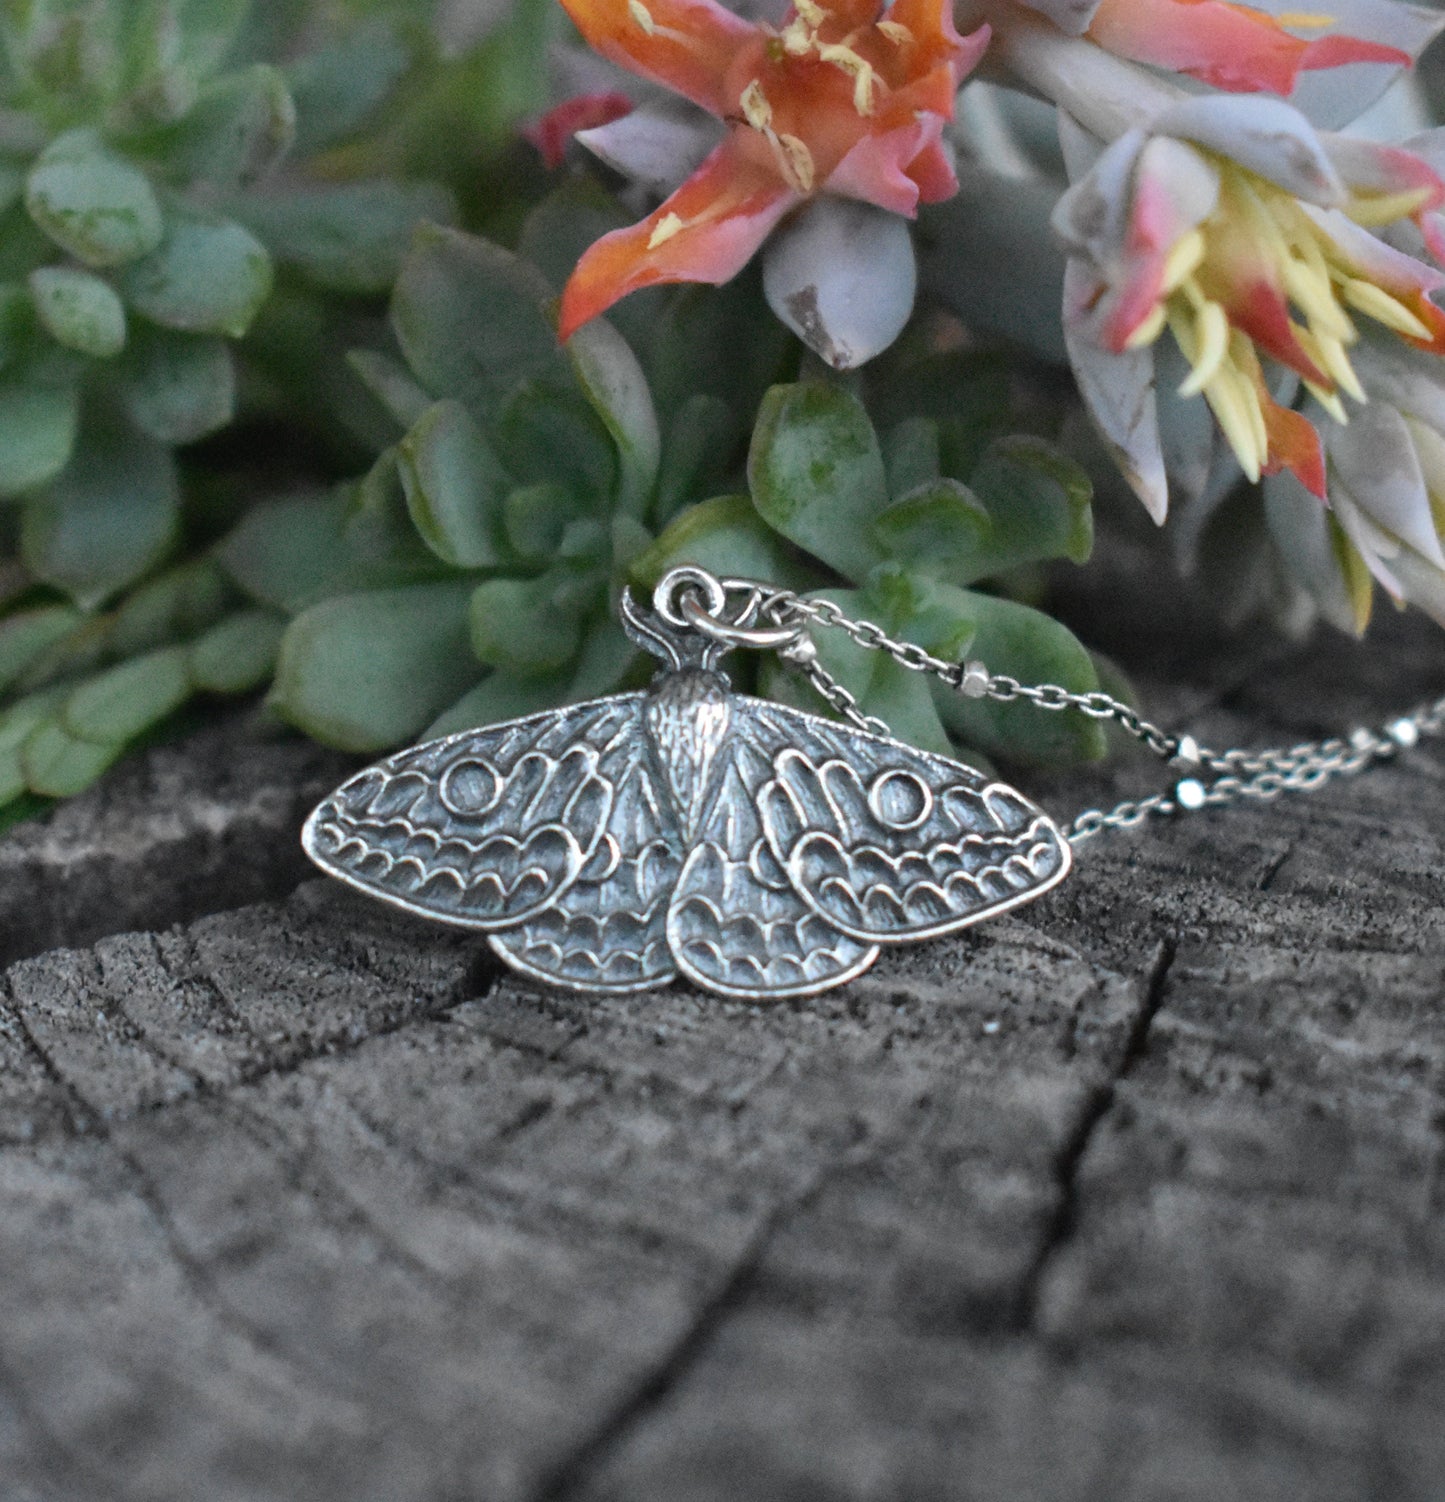 Moth Necklace- Moth Jewelry, Butterfly Necklace, Forest Necklace- Silver Necklace